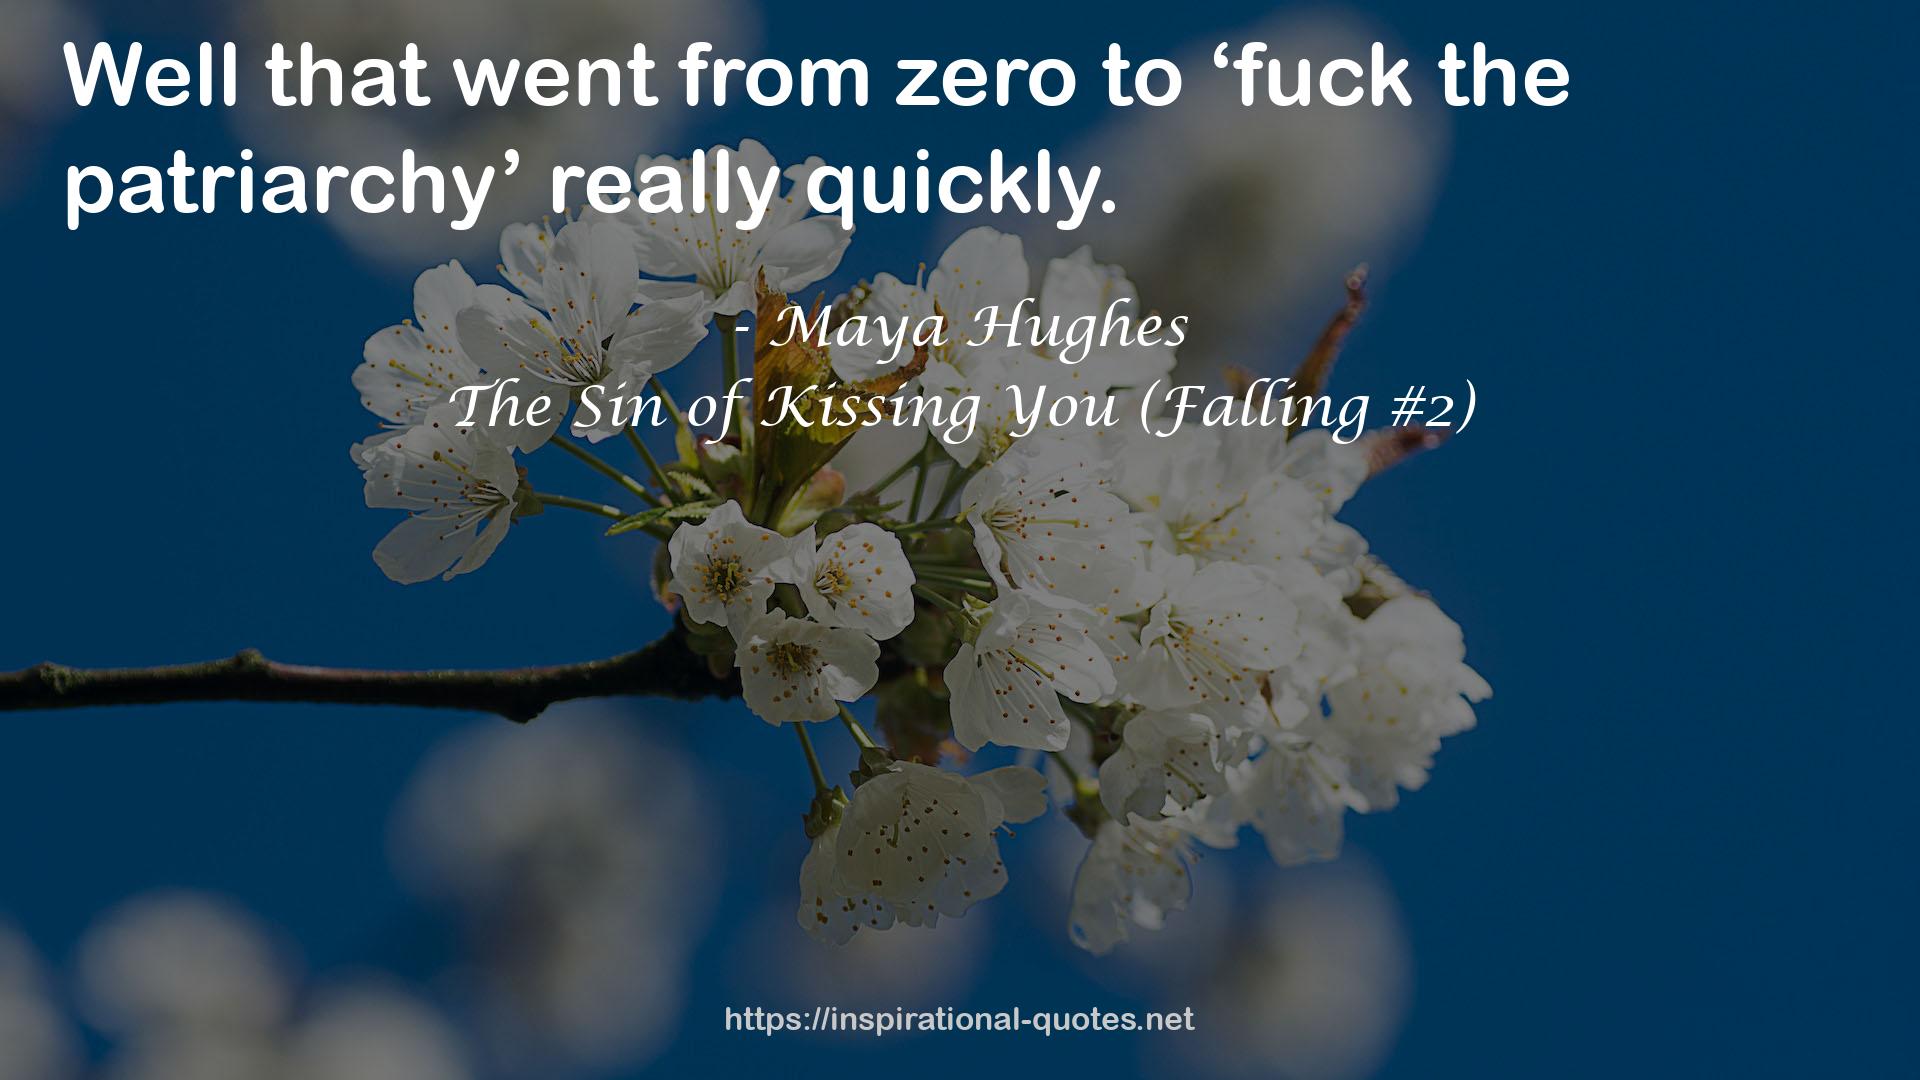 The Sin of Kissing You (Falling #2) QUOTES